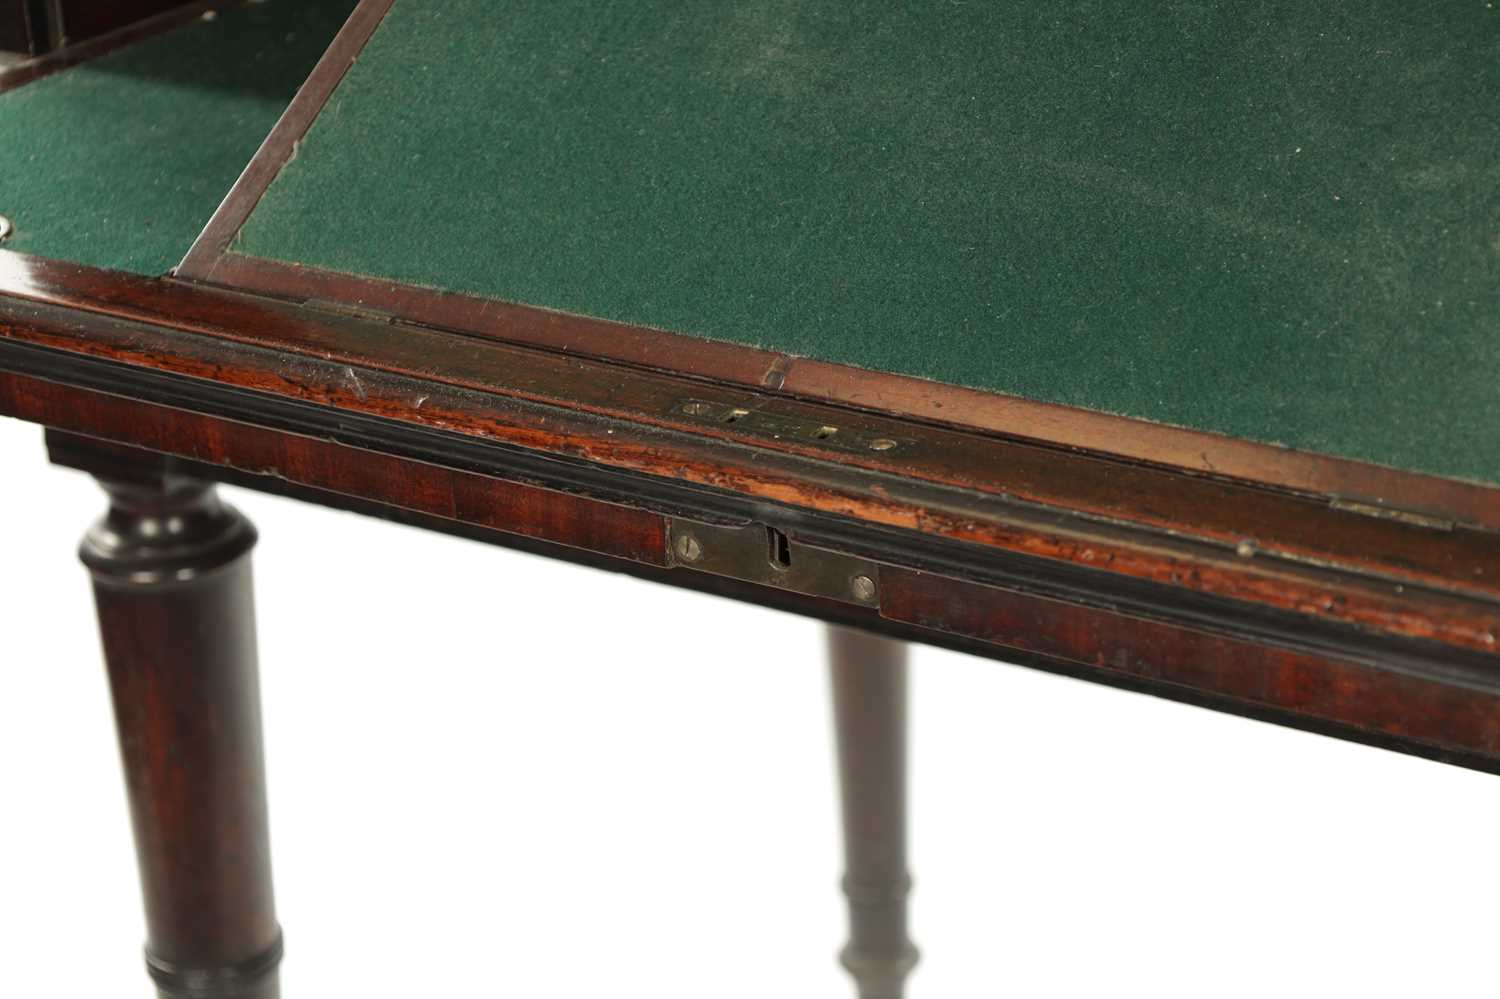 A REGENCY FIGURED MAHOGANY AND EBONY STRUNG TAMBOUR FRONT CYLINDER DESK - Image 5 of 8